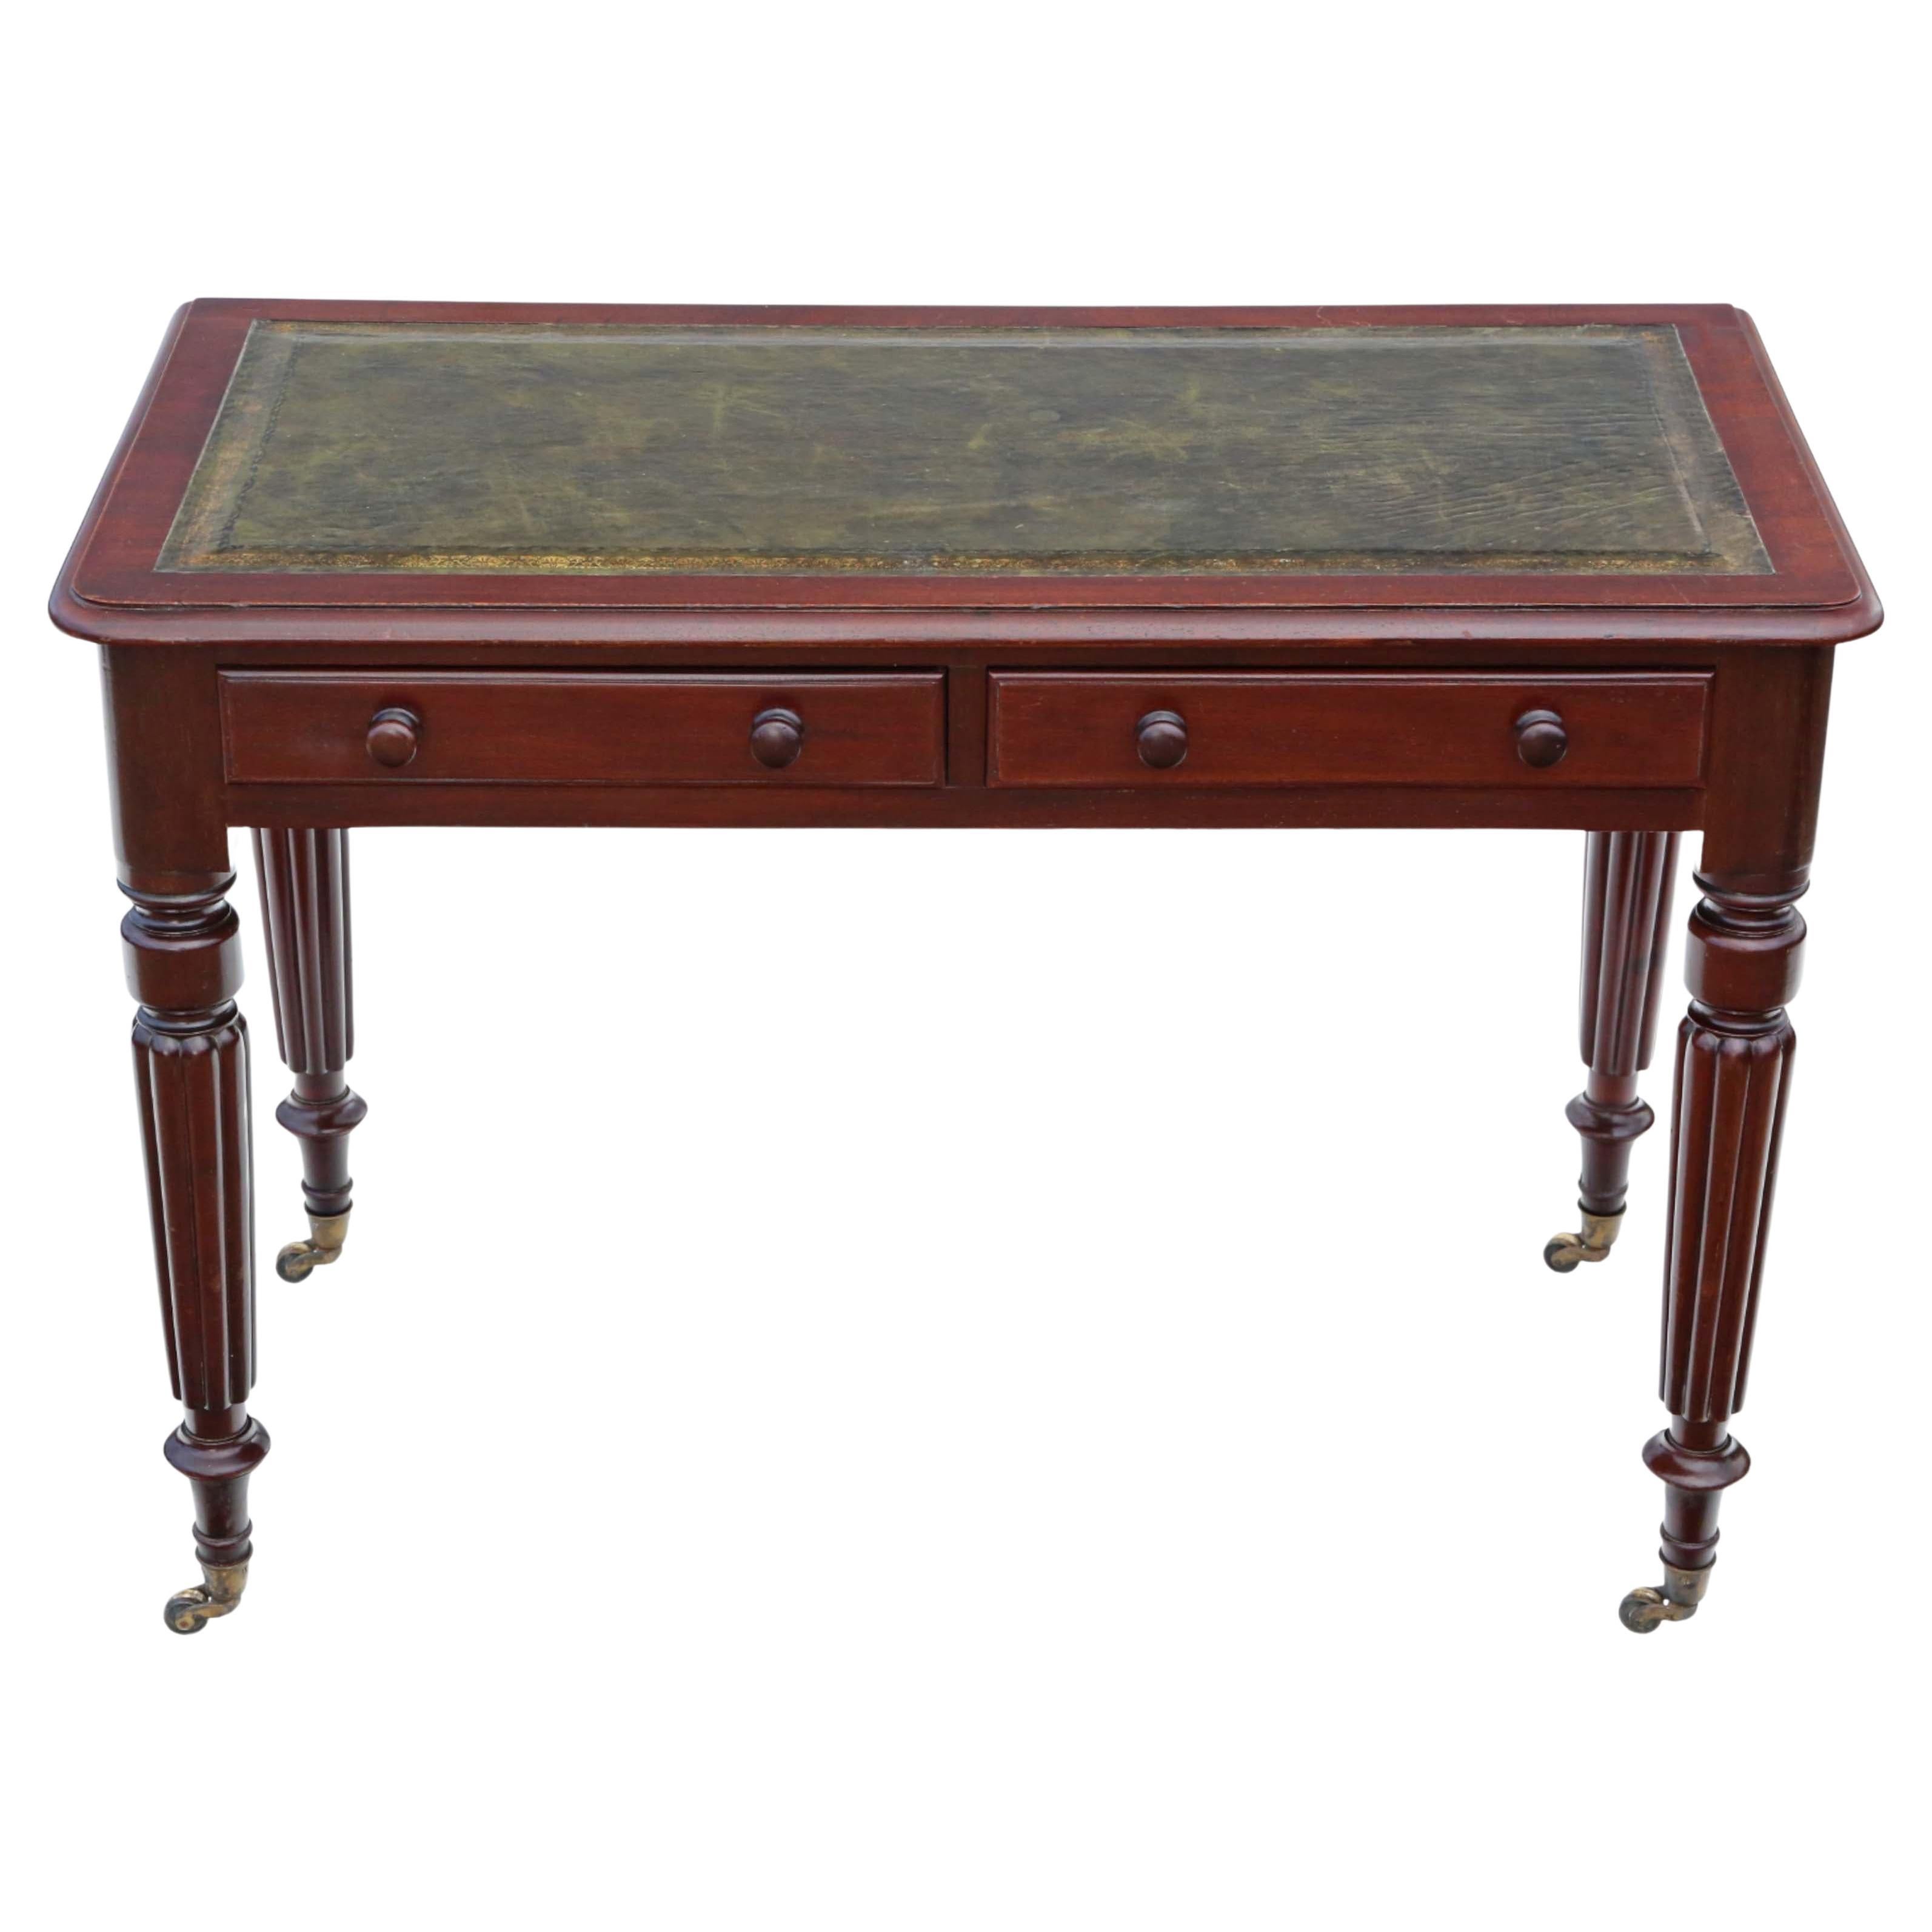 Antique Edwards and Roberts 19th Century mahogany writing dressing table desk